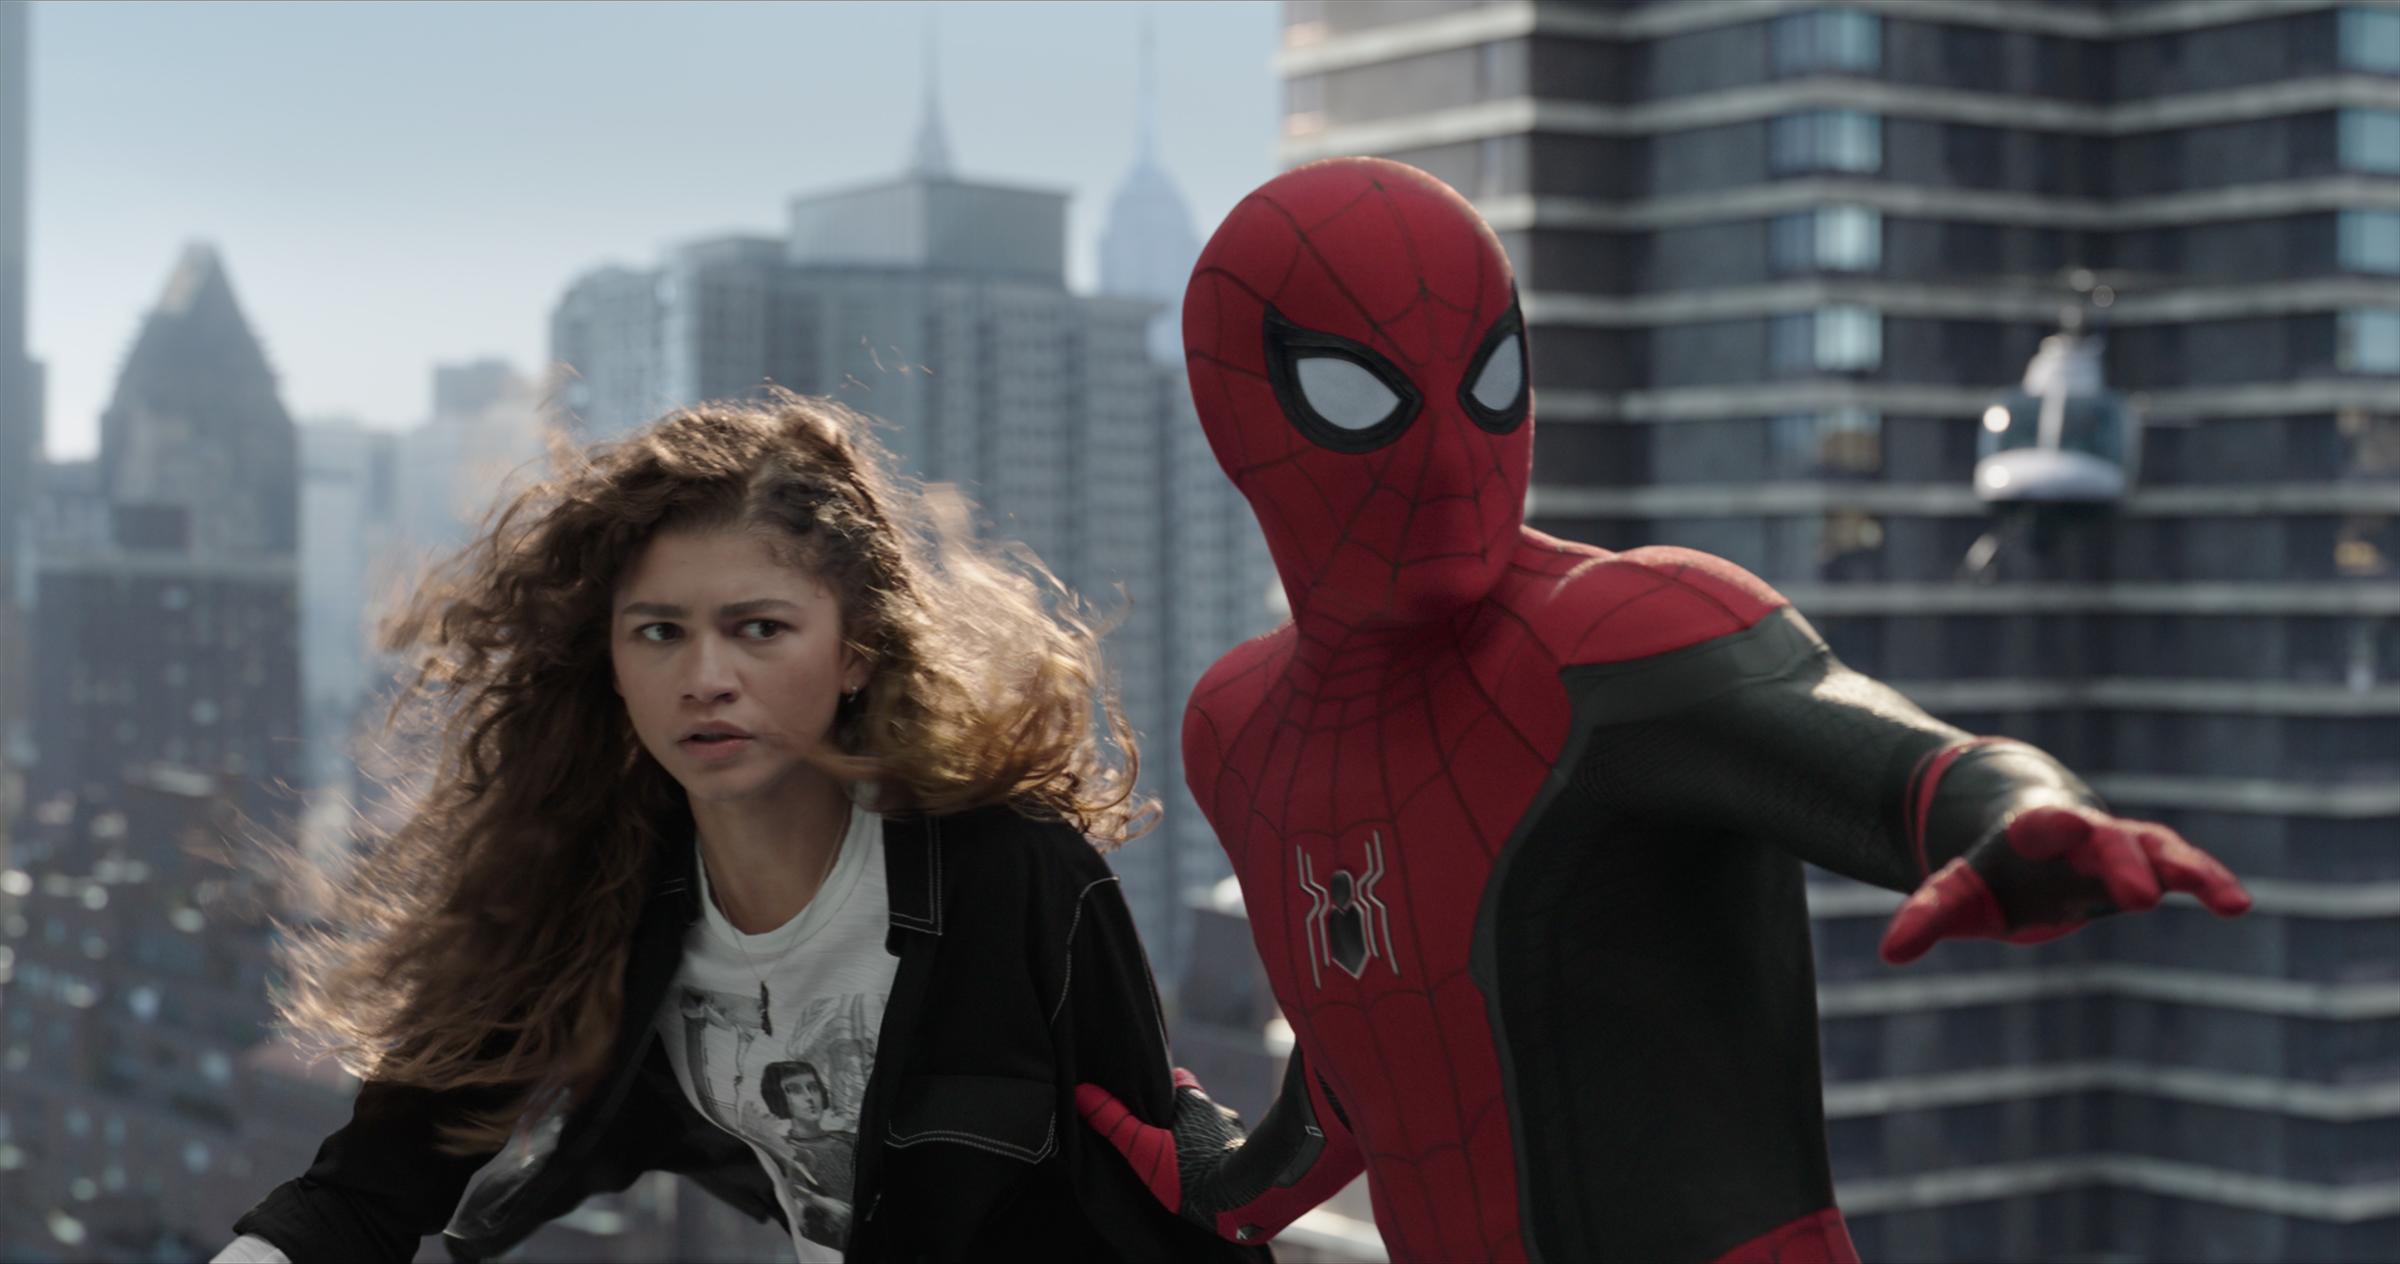 MJ (Zendaya) prepares to freefall with Spider-man in Columbia Pictures' SPIDER-MAN: NO WAY HOME.